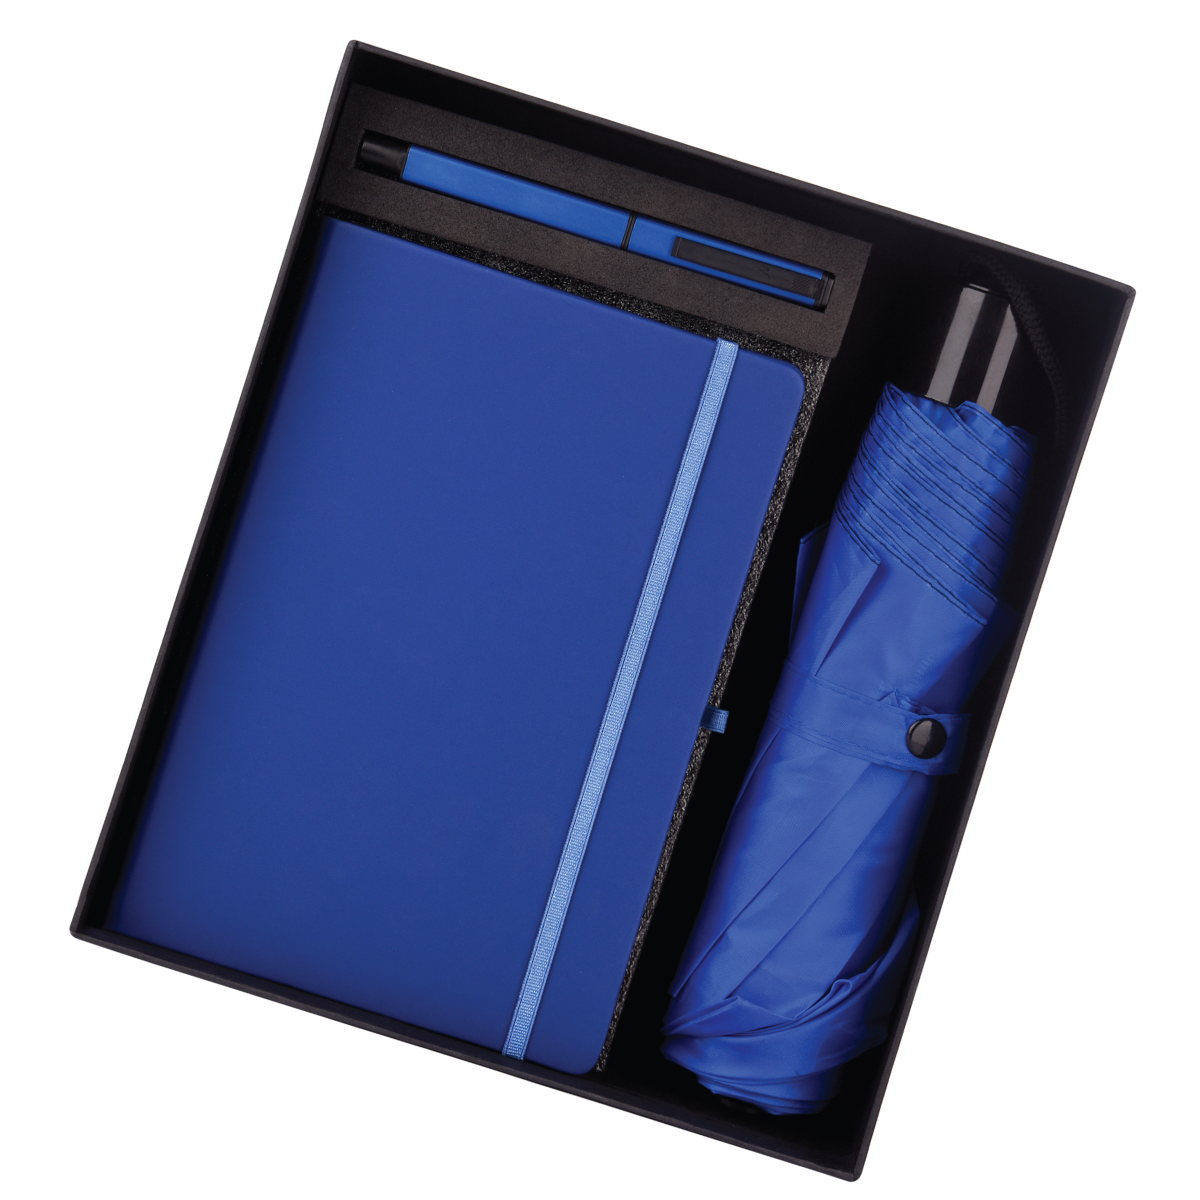 Blue 3 in 1 Black Combo Gift Set Umbrella, Pen, Soft Diary Notebook - For Employee Joining Kit, Corporate, Client or Dealer Gifting HK37349